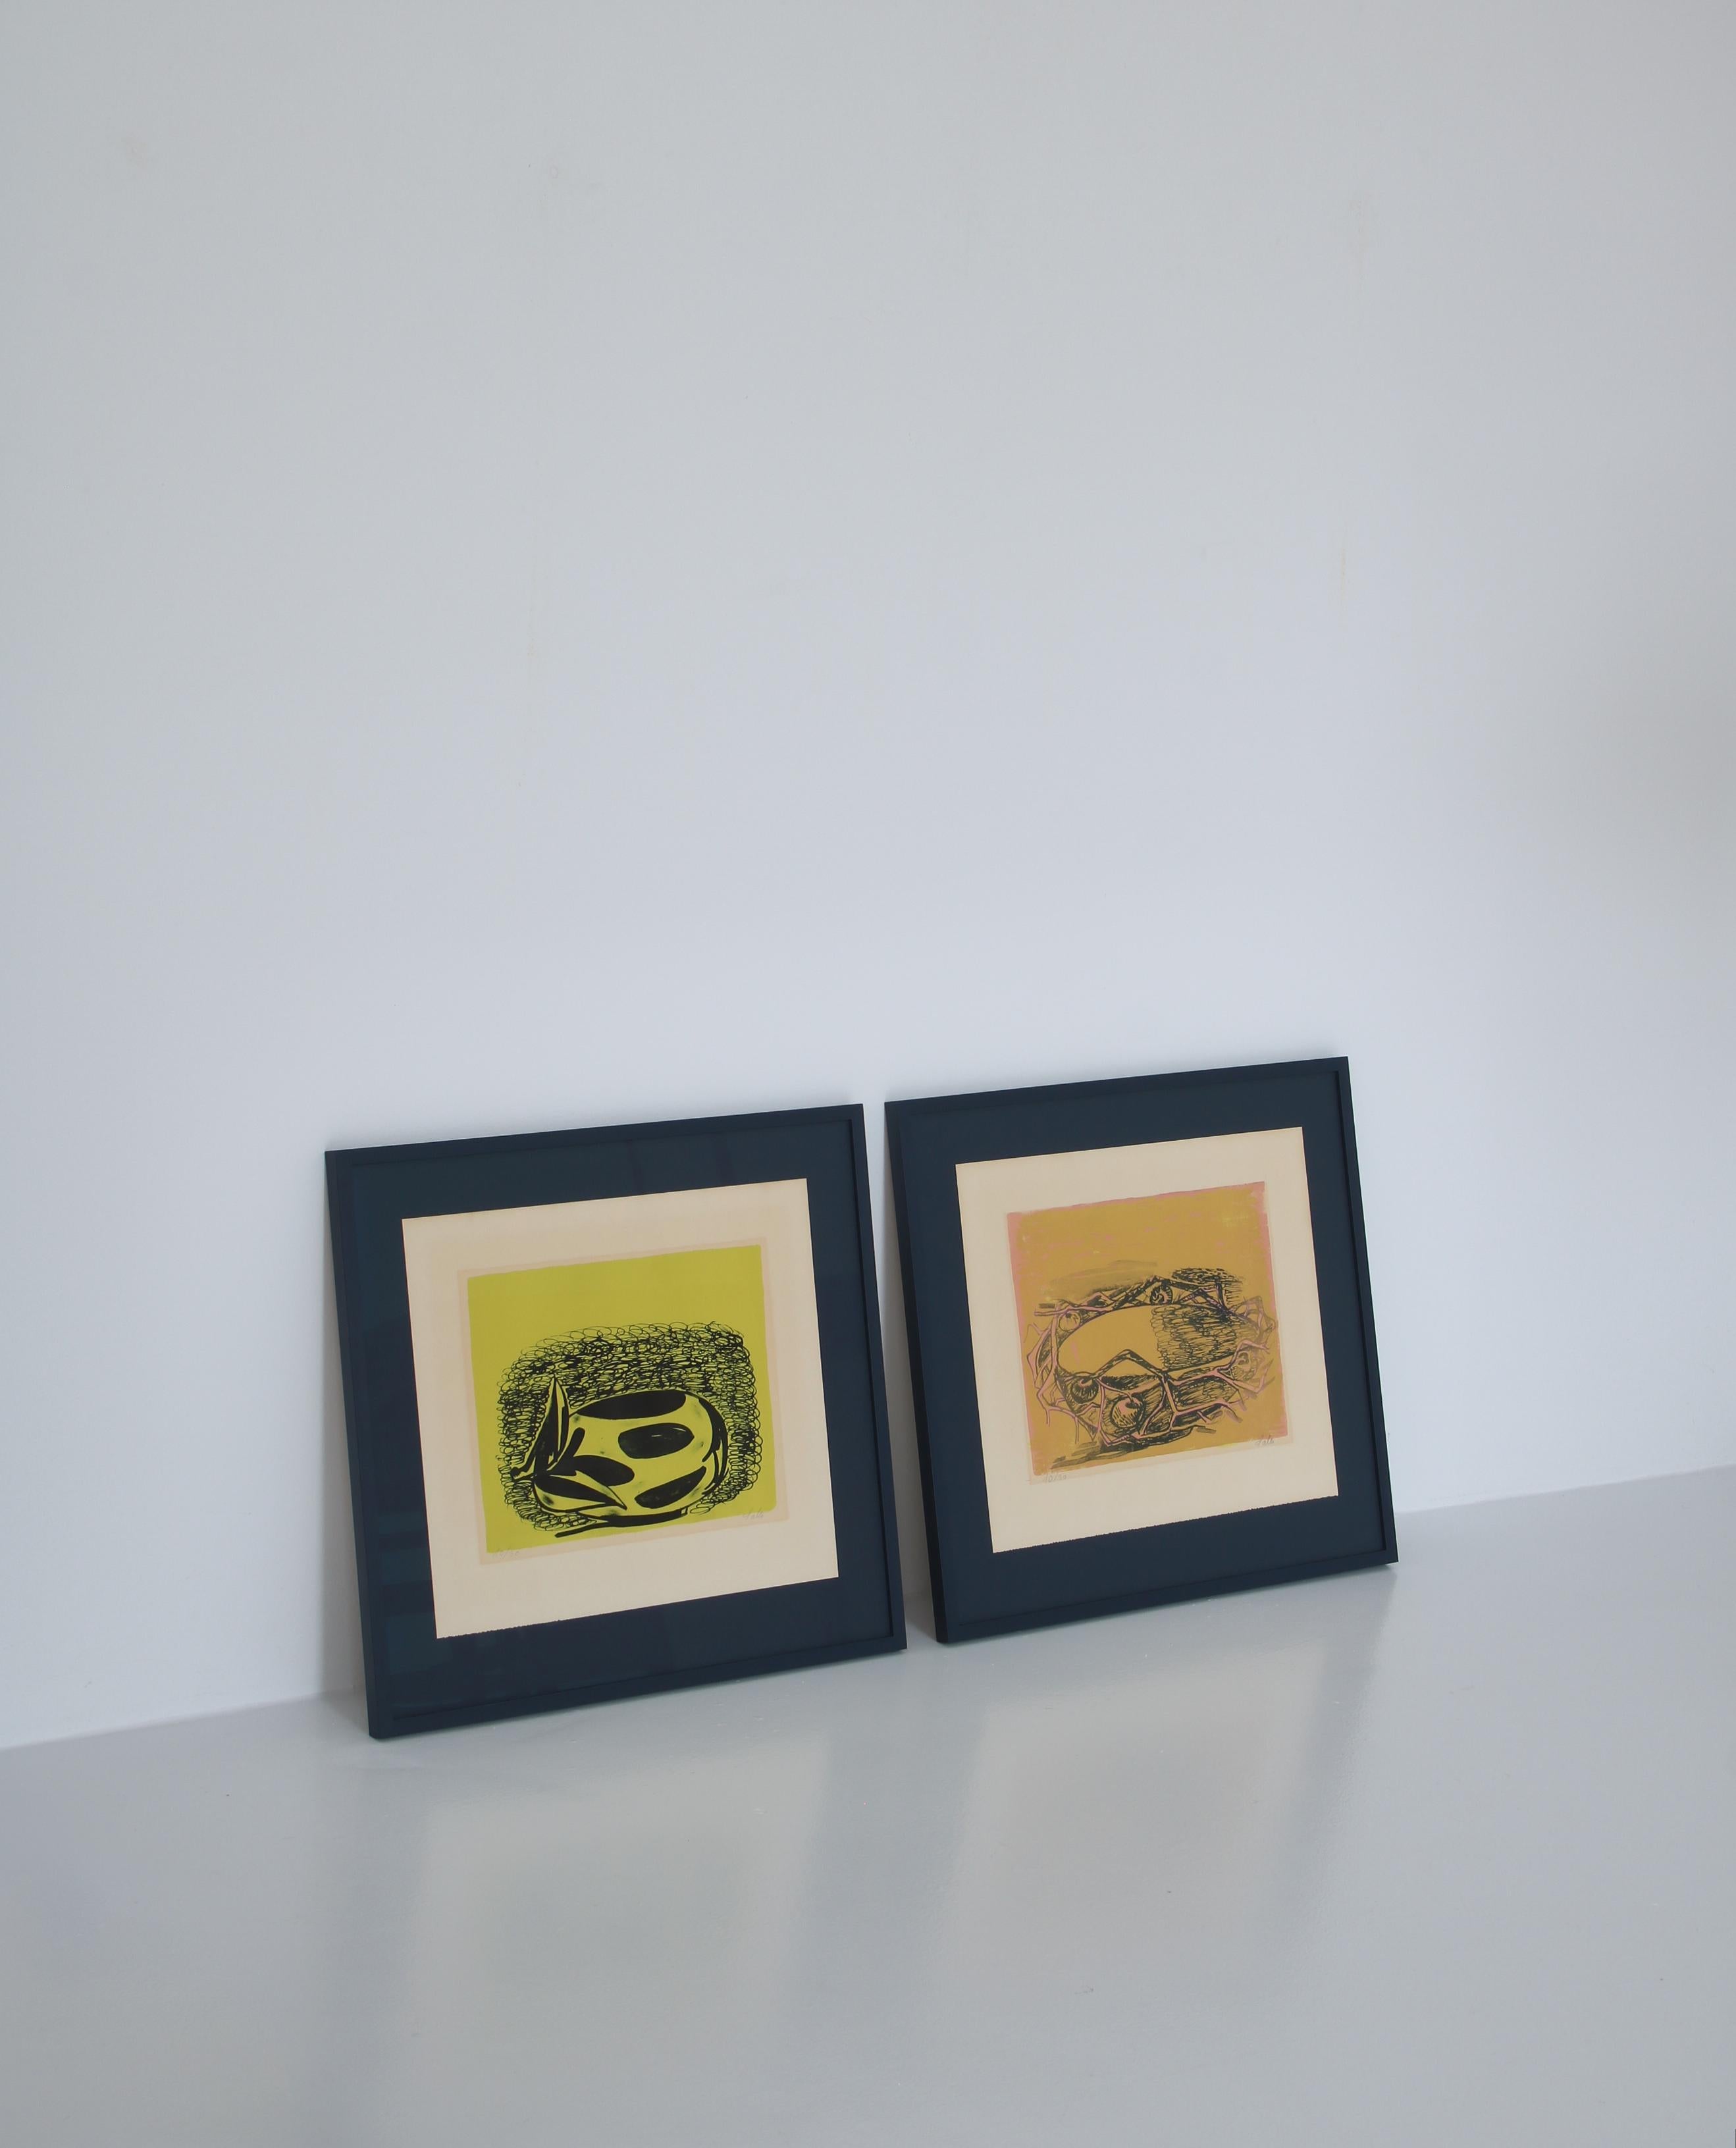 Pair of Original Axel Salto Lithographies in Blue Frames, 1930s For Sale 4